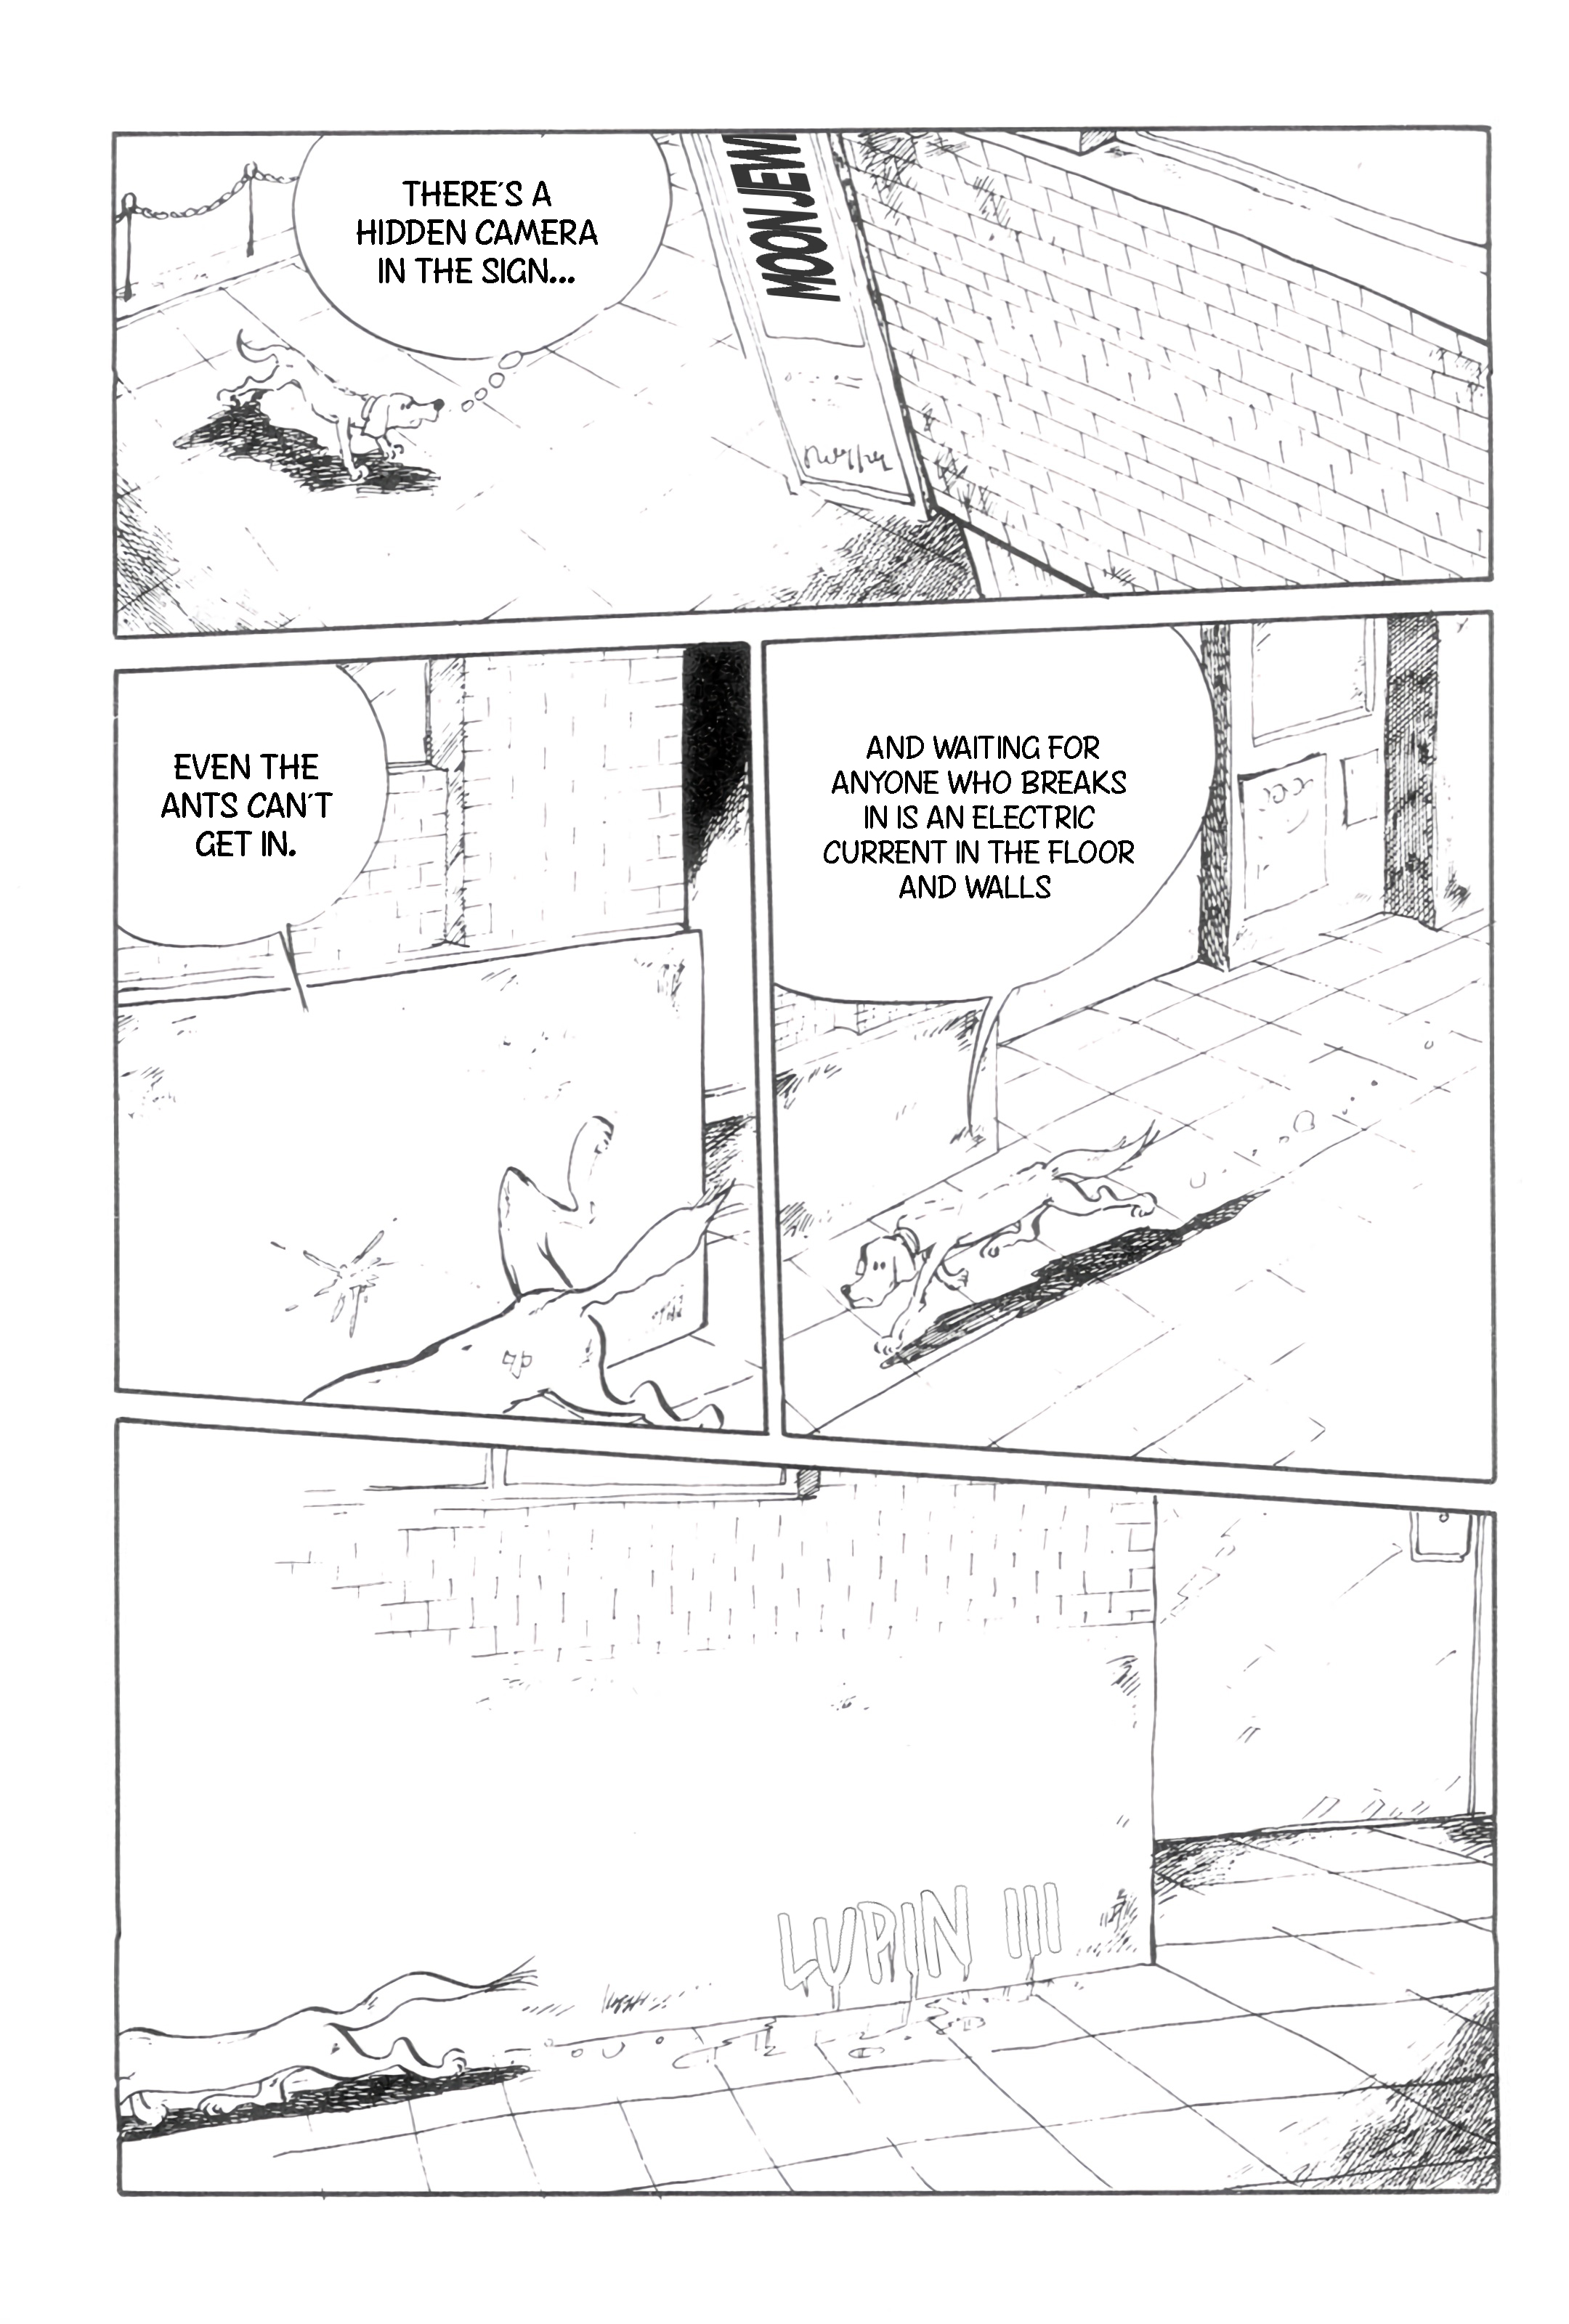 Lupin Iii: World’S Most Wanted Vol.12 Chapter 135: Jerk-In-The-Box - Picture 3